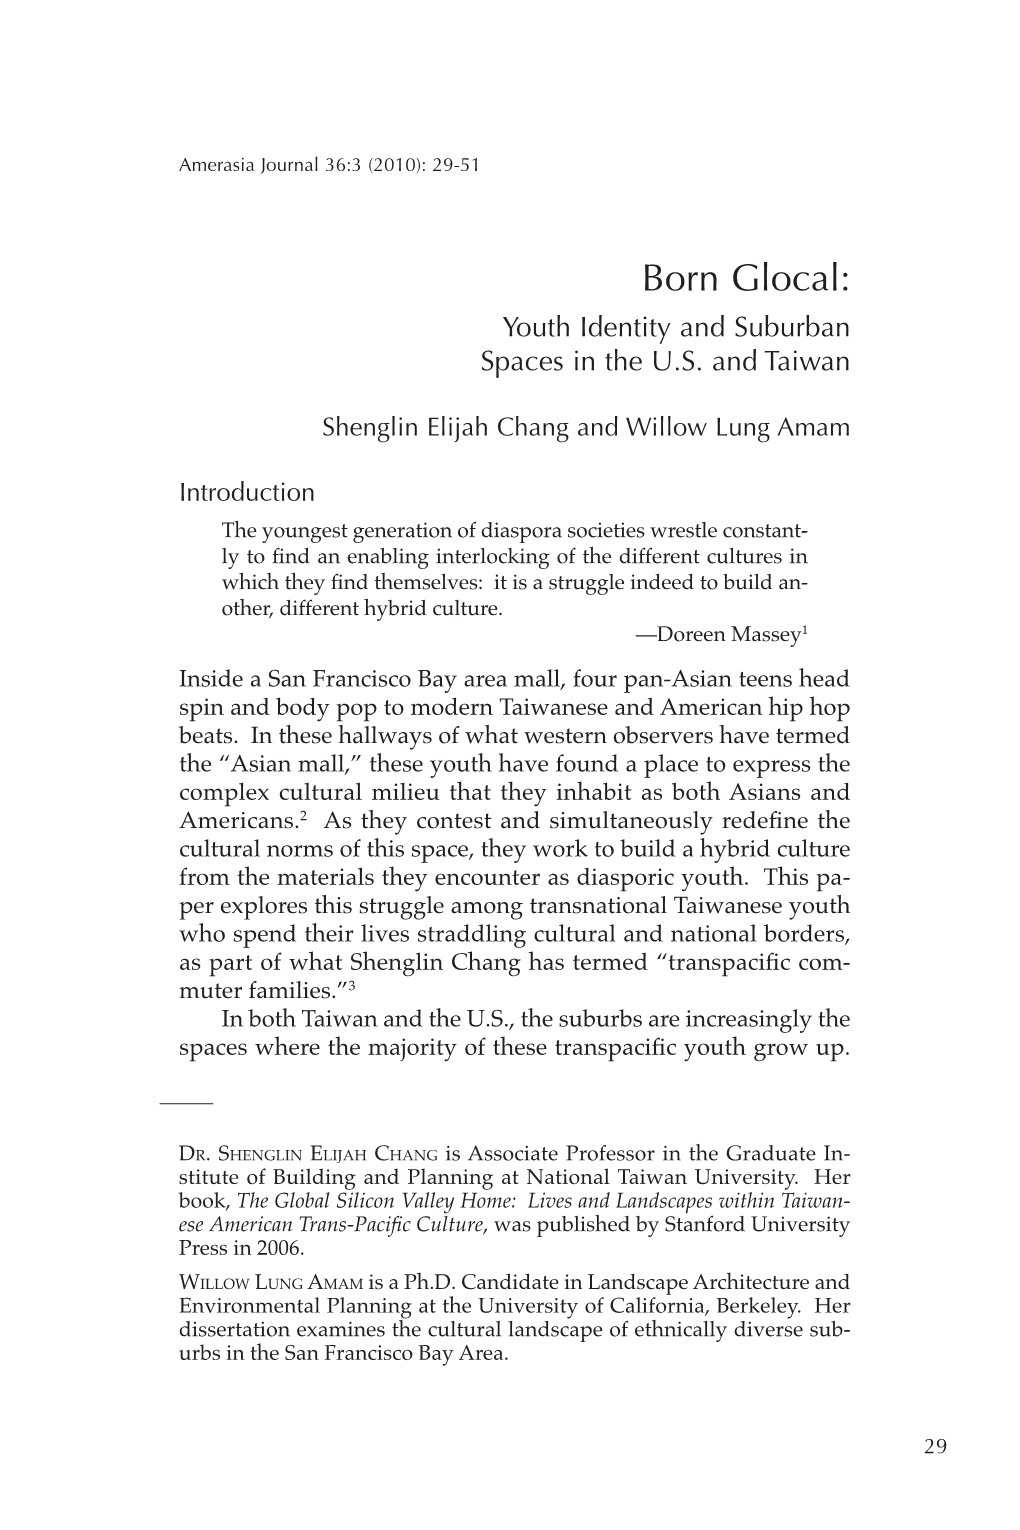 Born Glocal: Youth Identity and Suburban Spaces in the U.S